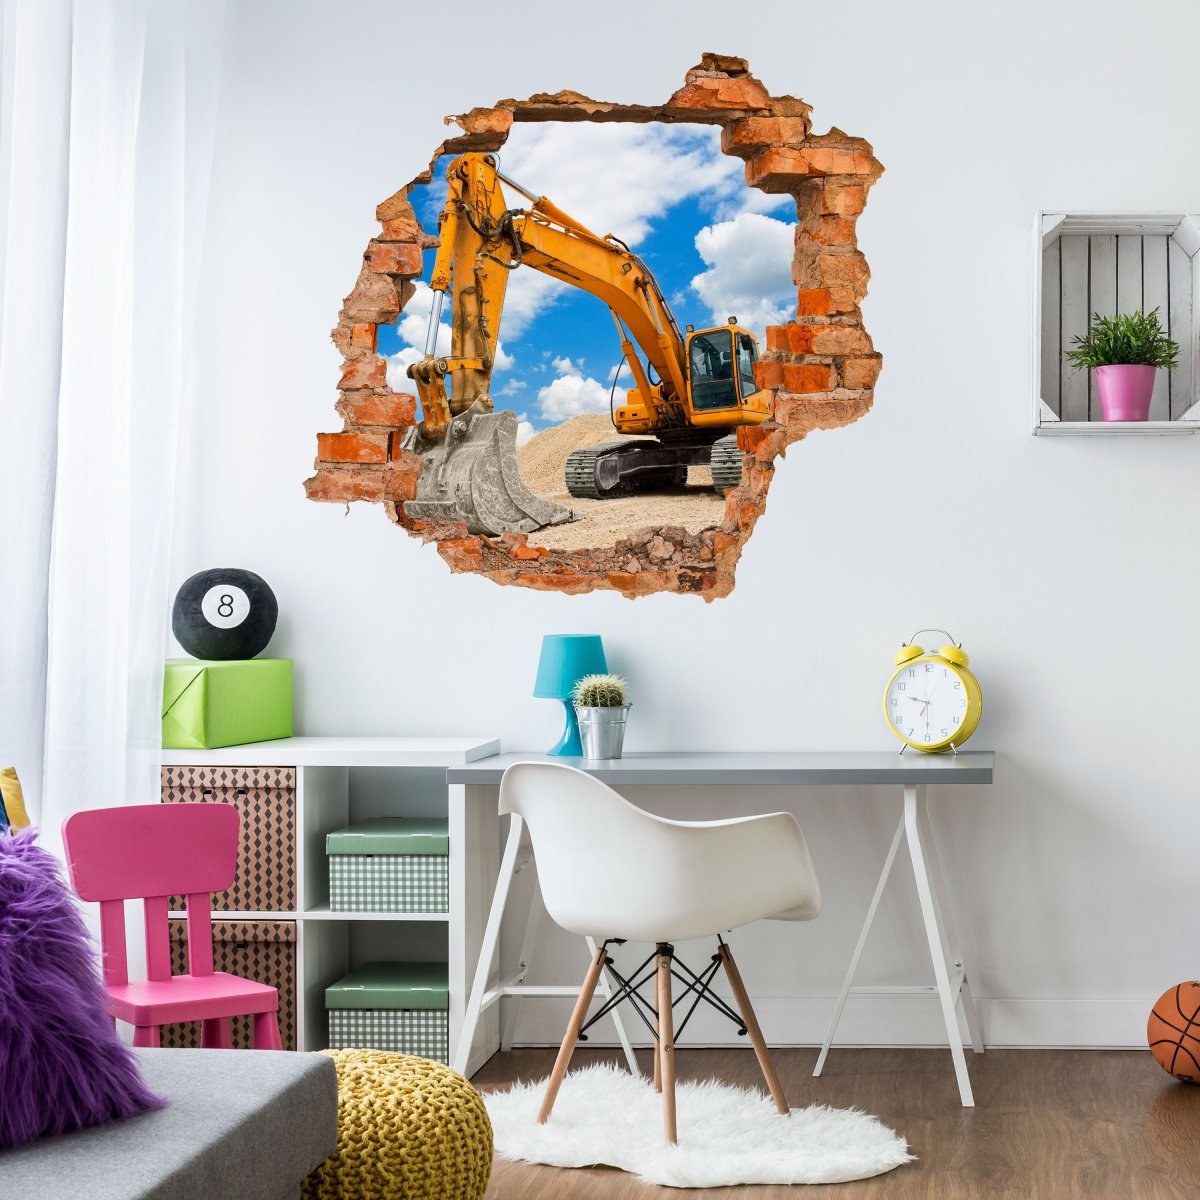 Sticker mural 3D Excavatrice - Wall Decal M0520